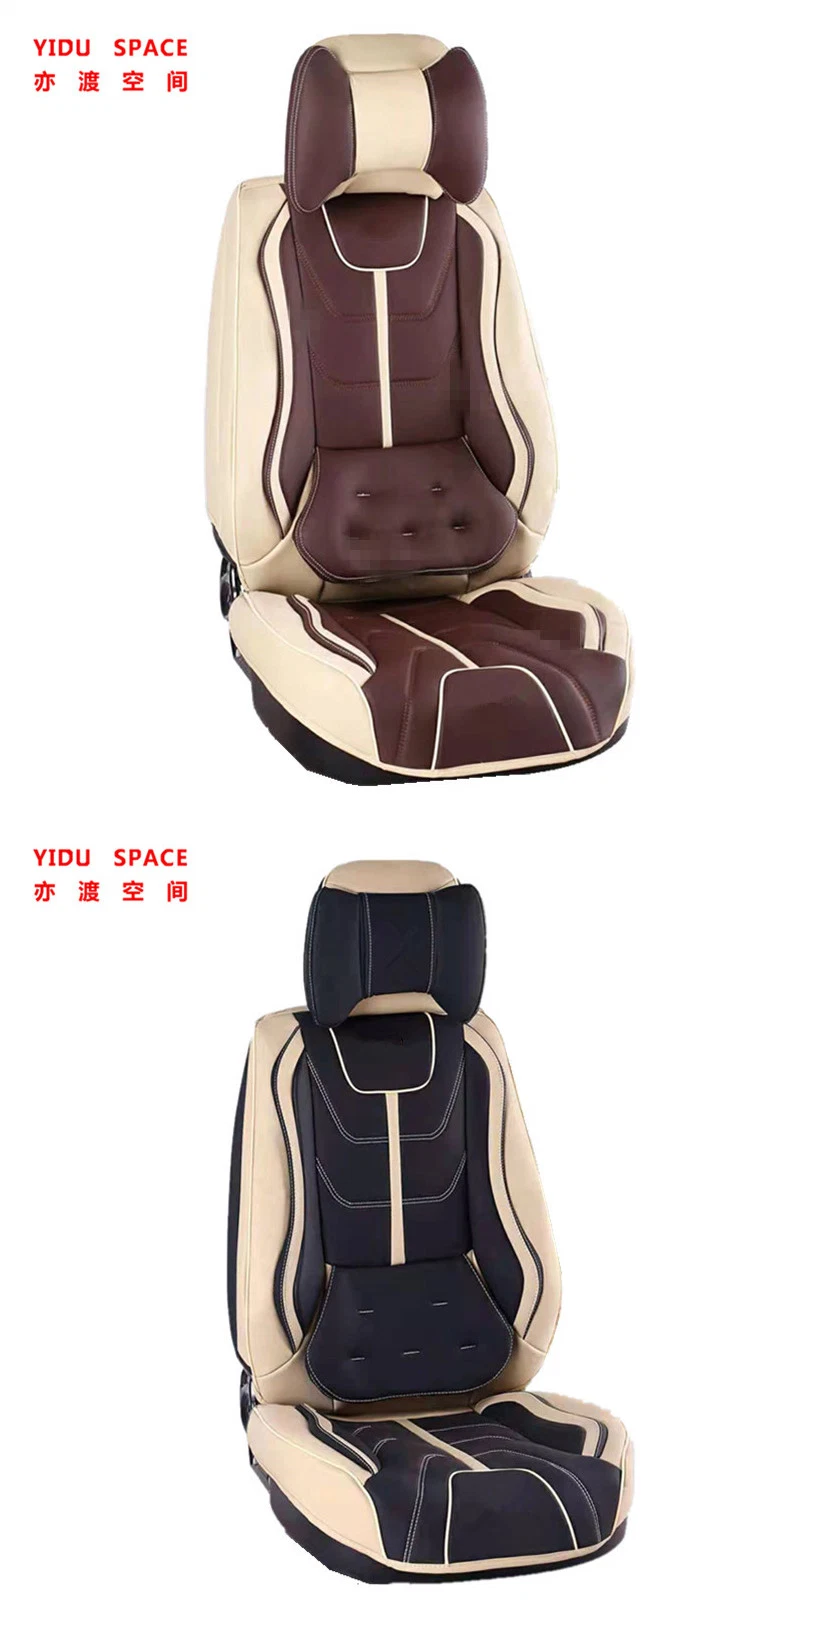 Car Accessories Car Decoration Cushion Universal 9d 360 Degree Full Surround Luxury PU Leather Auto Car Seat Cover